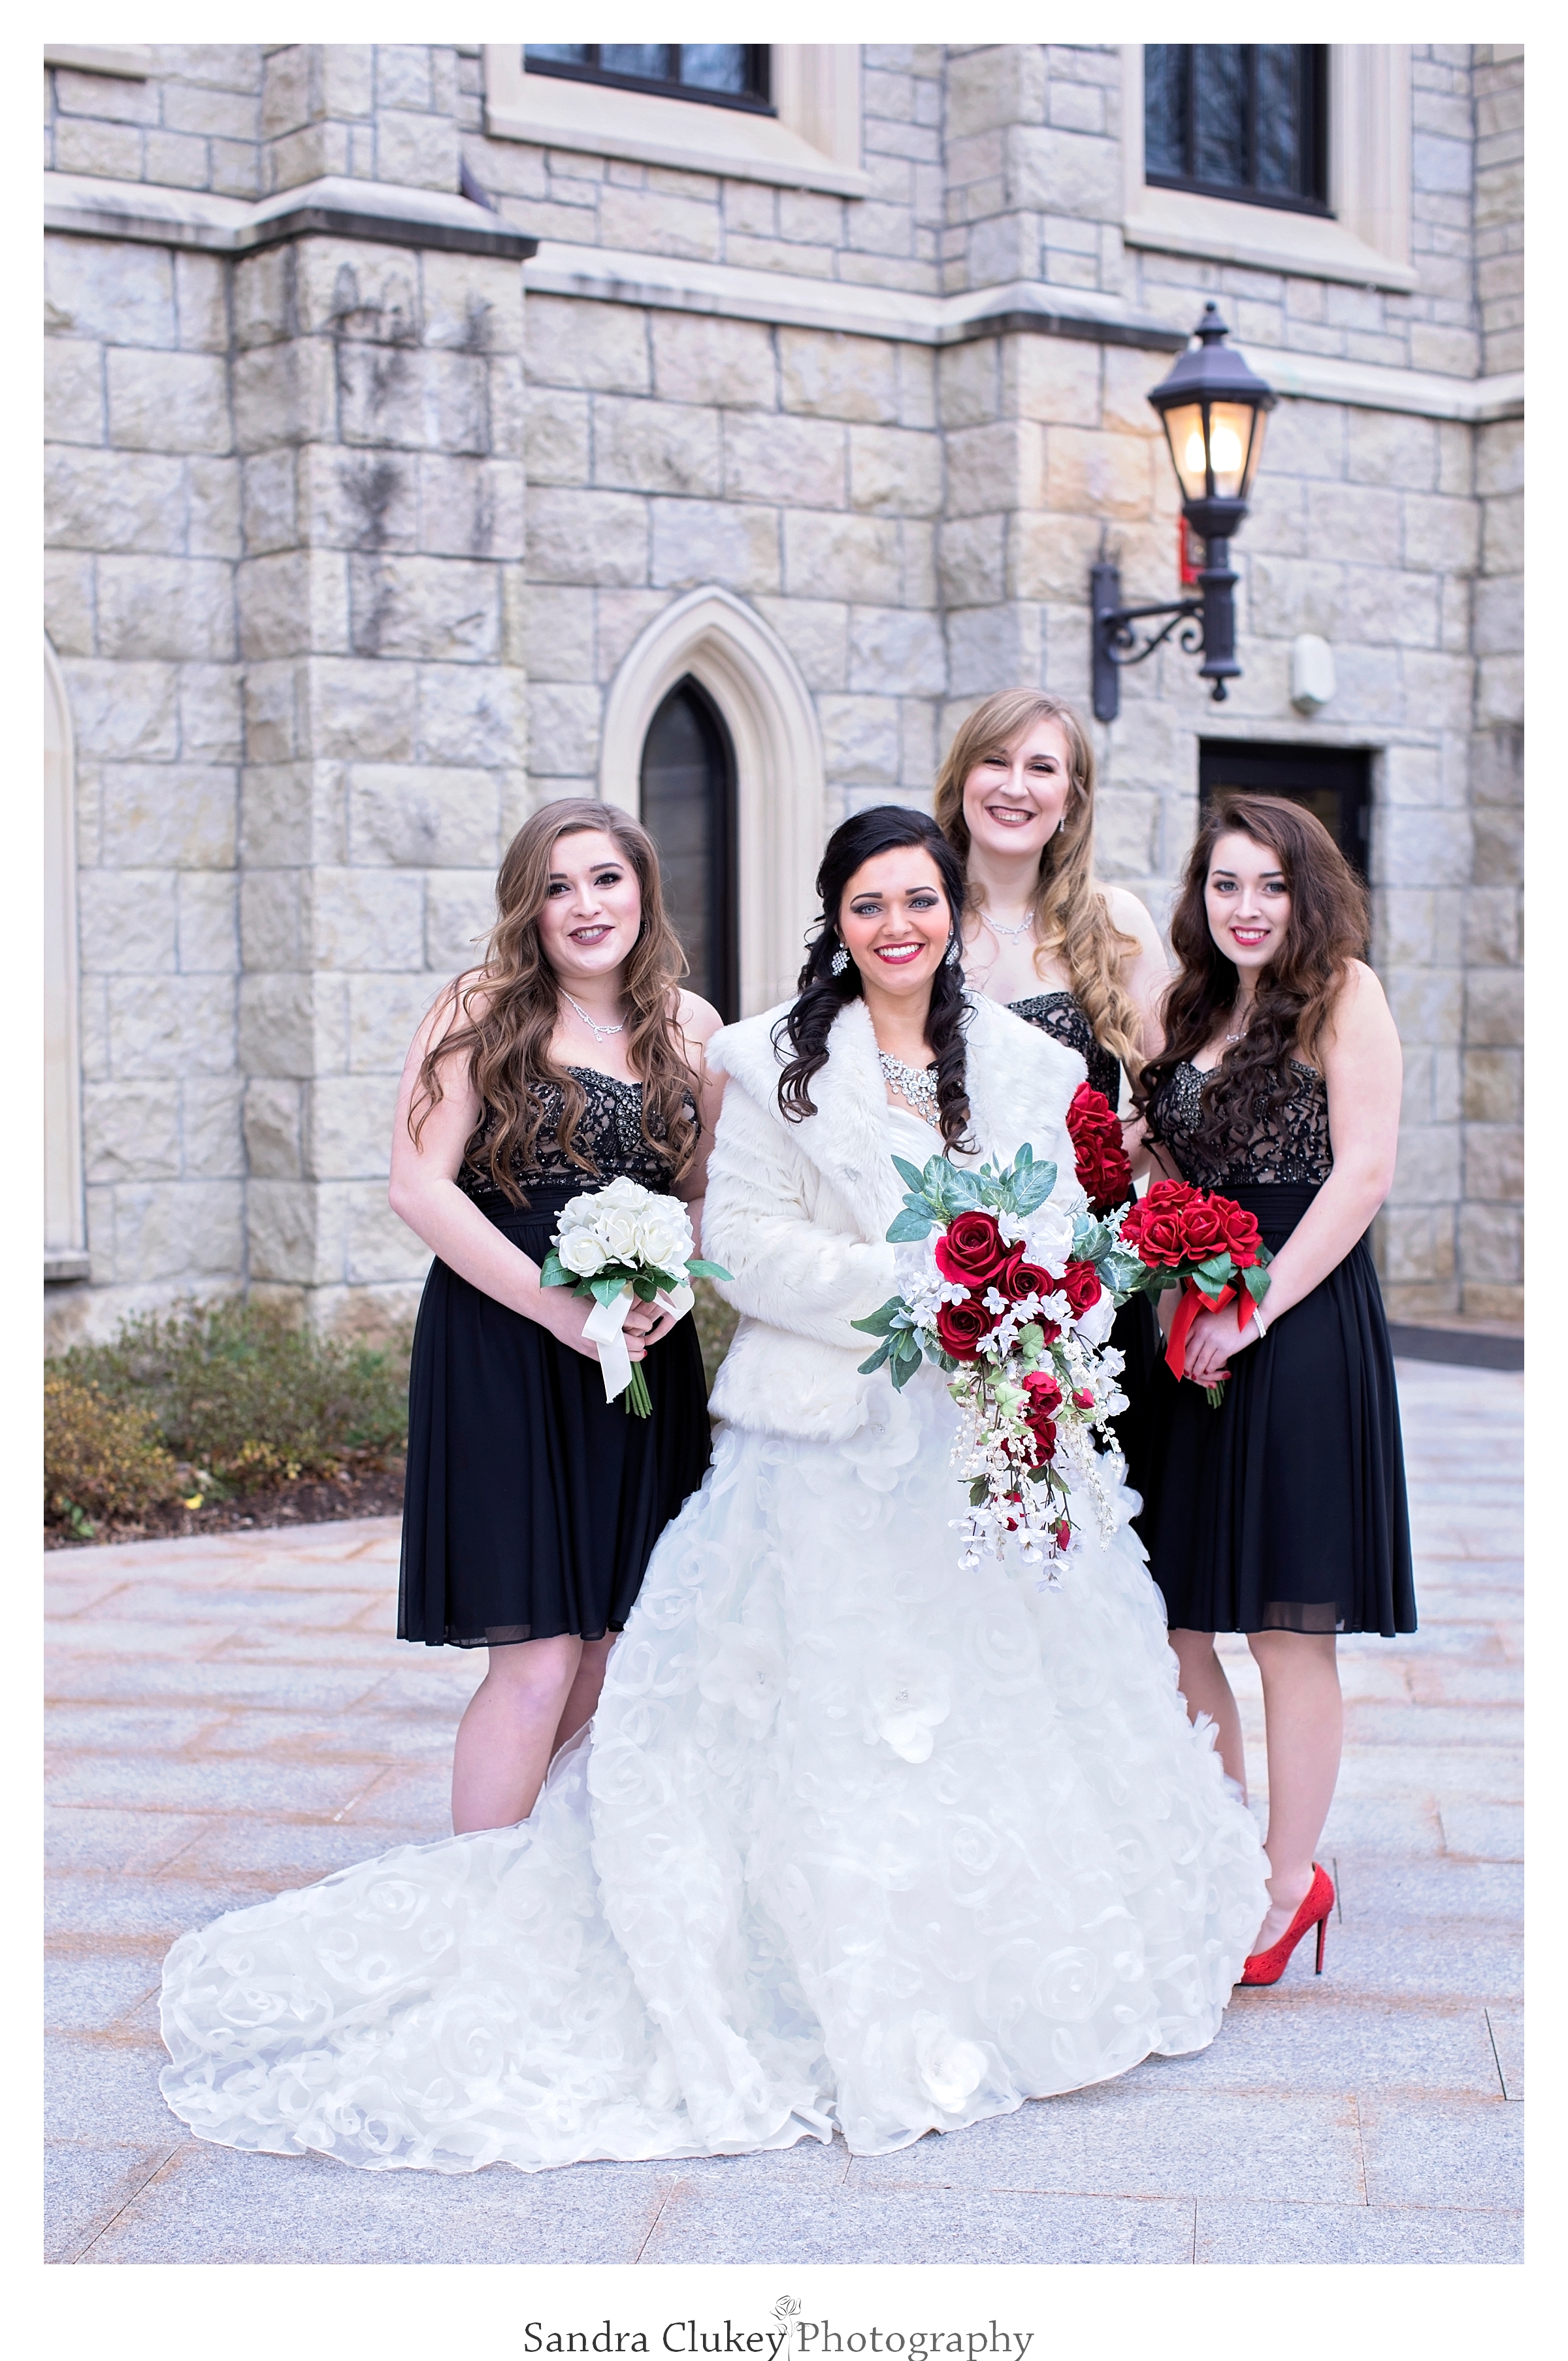 Delightful image of bride with her girls